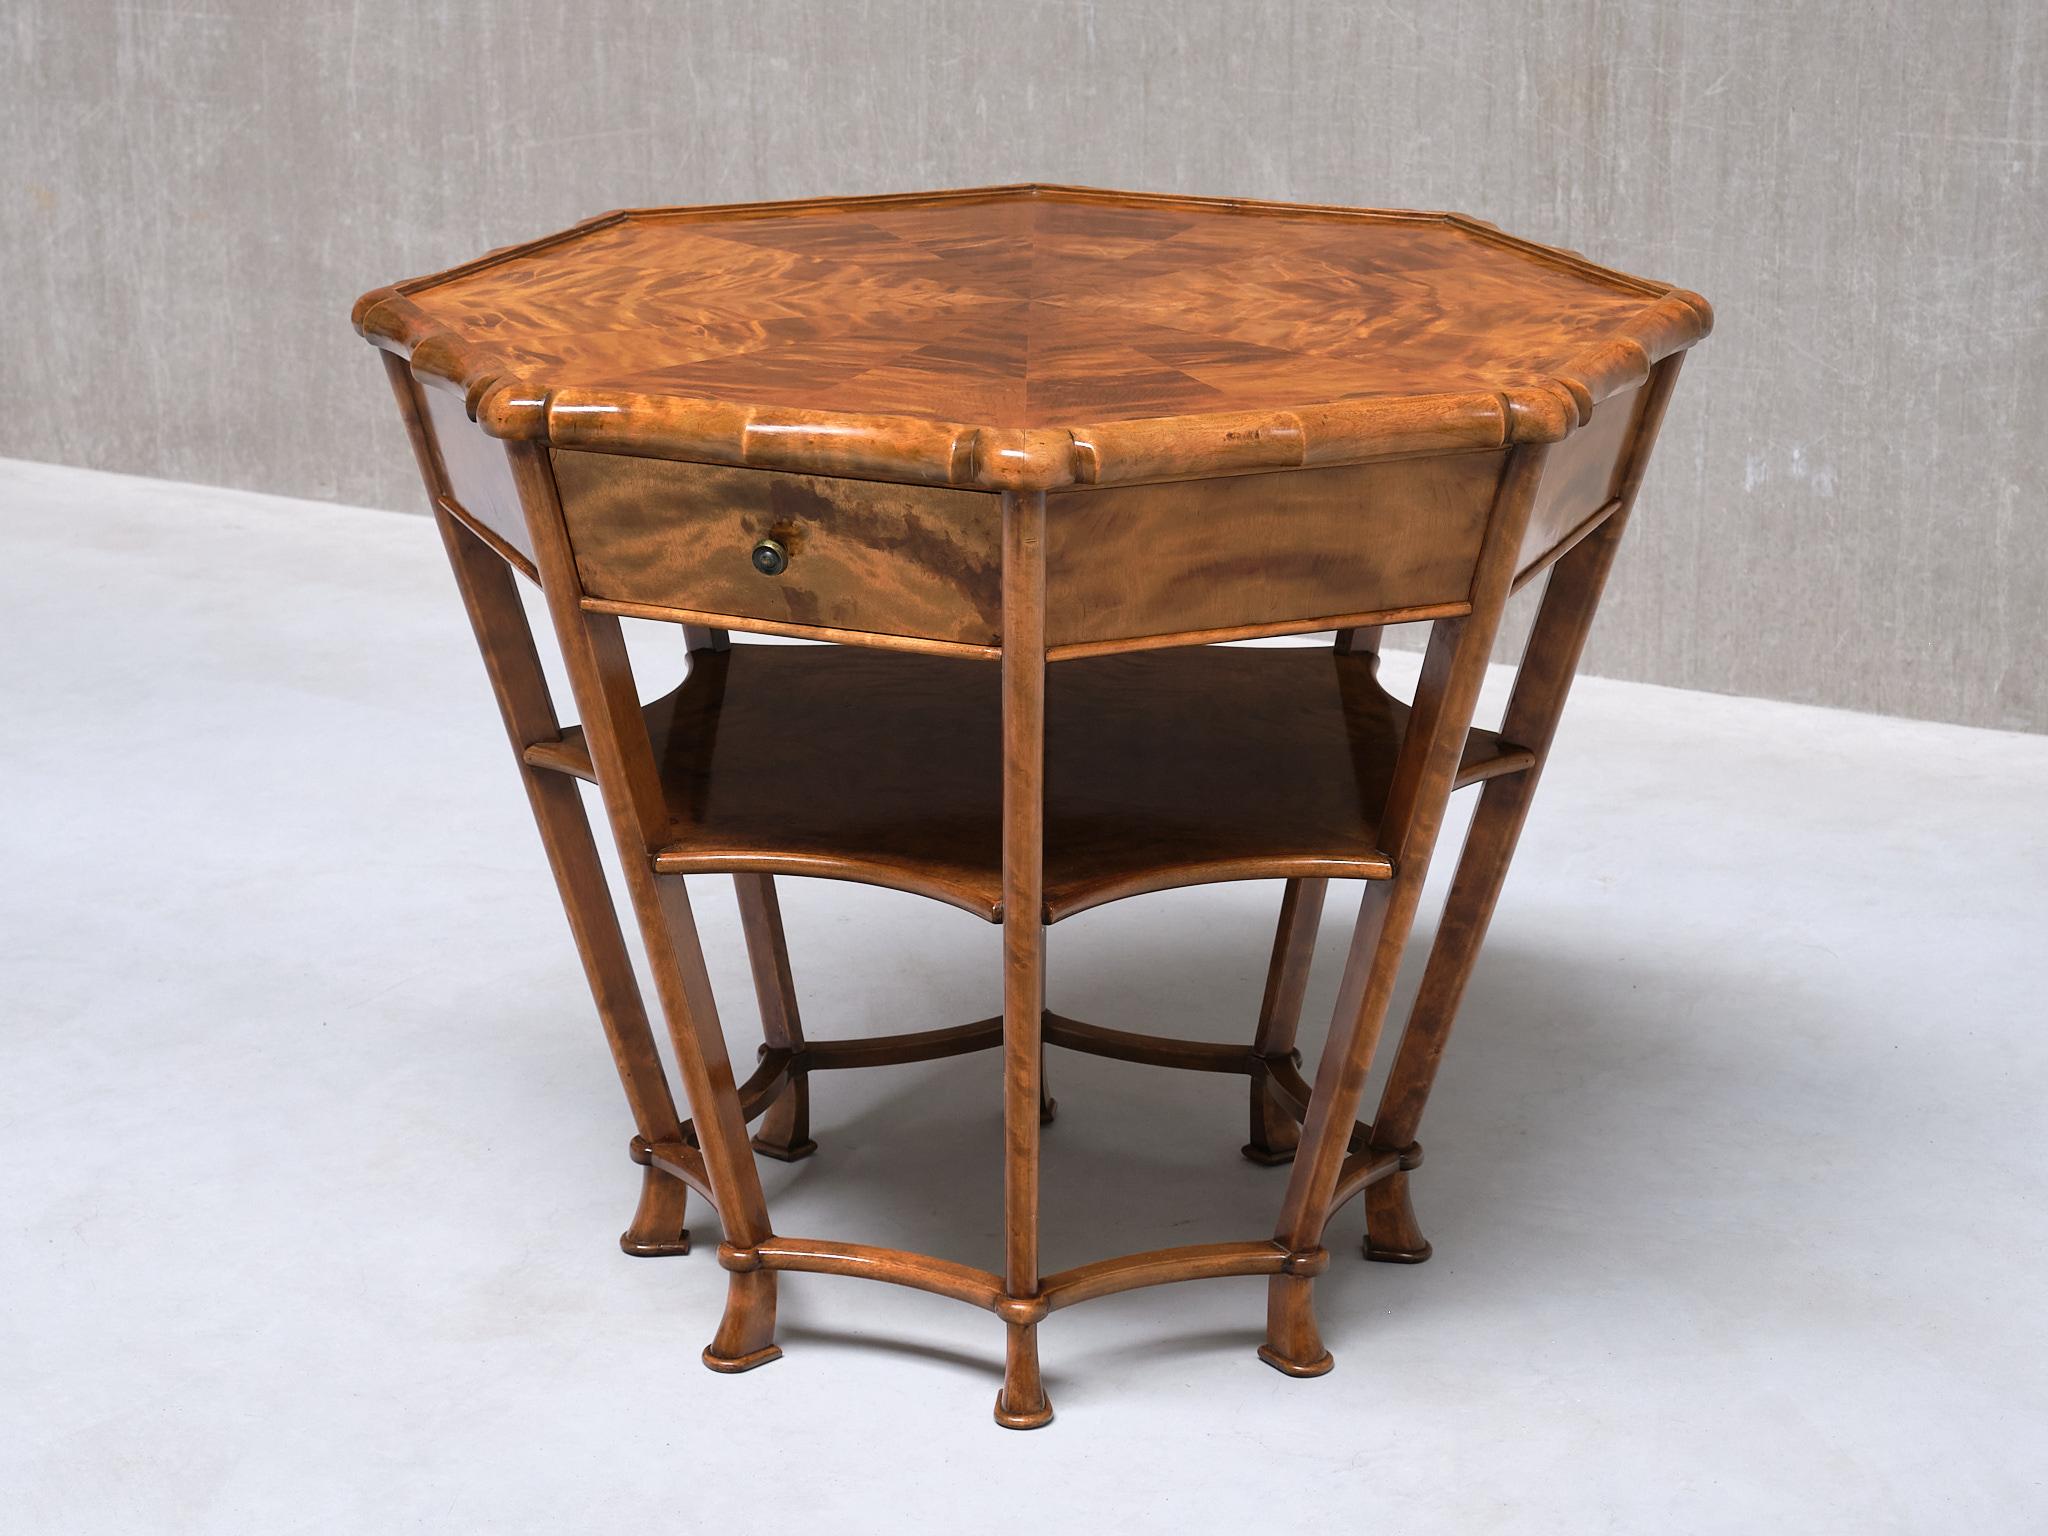 This rare center table was produced in Germany in the late 1920s. Although the maker and designer remain unknown, the high level of craftsmanship and choice of material make this an exceptional occasional table.
The originality of the design